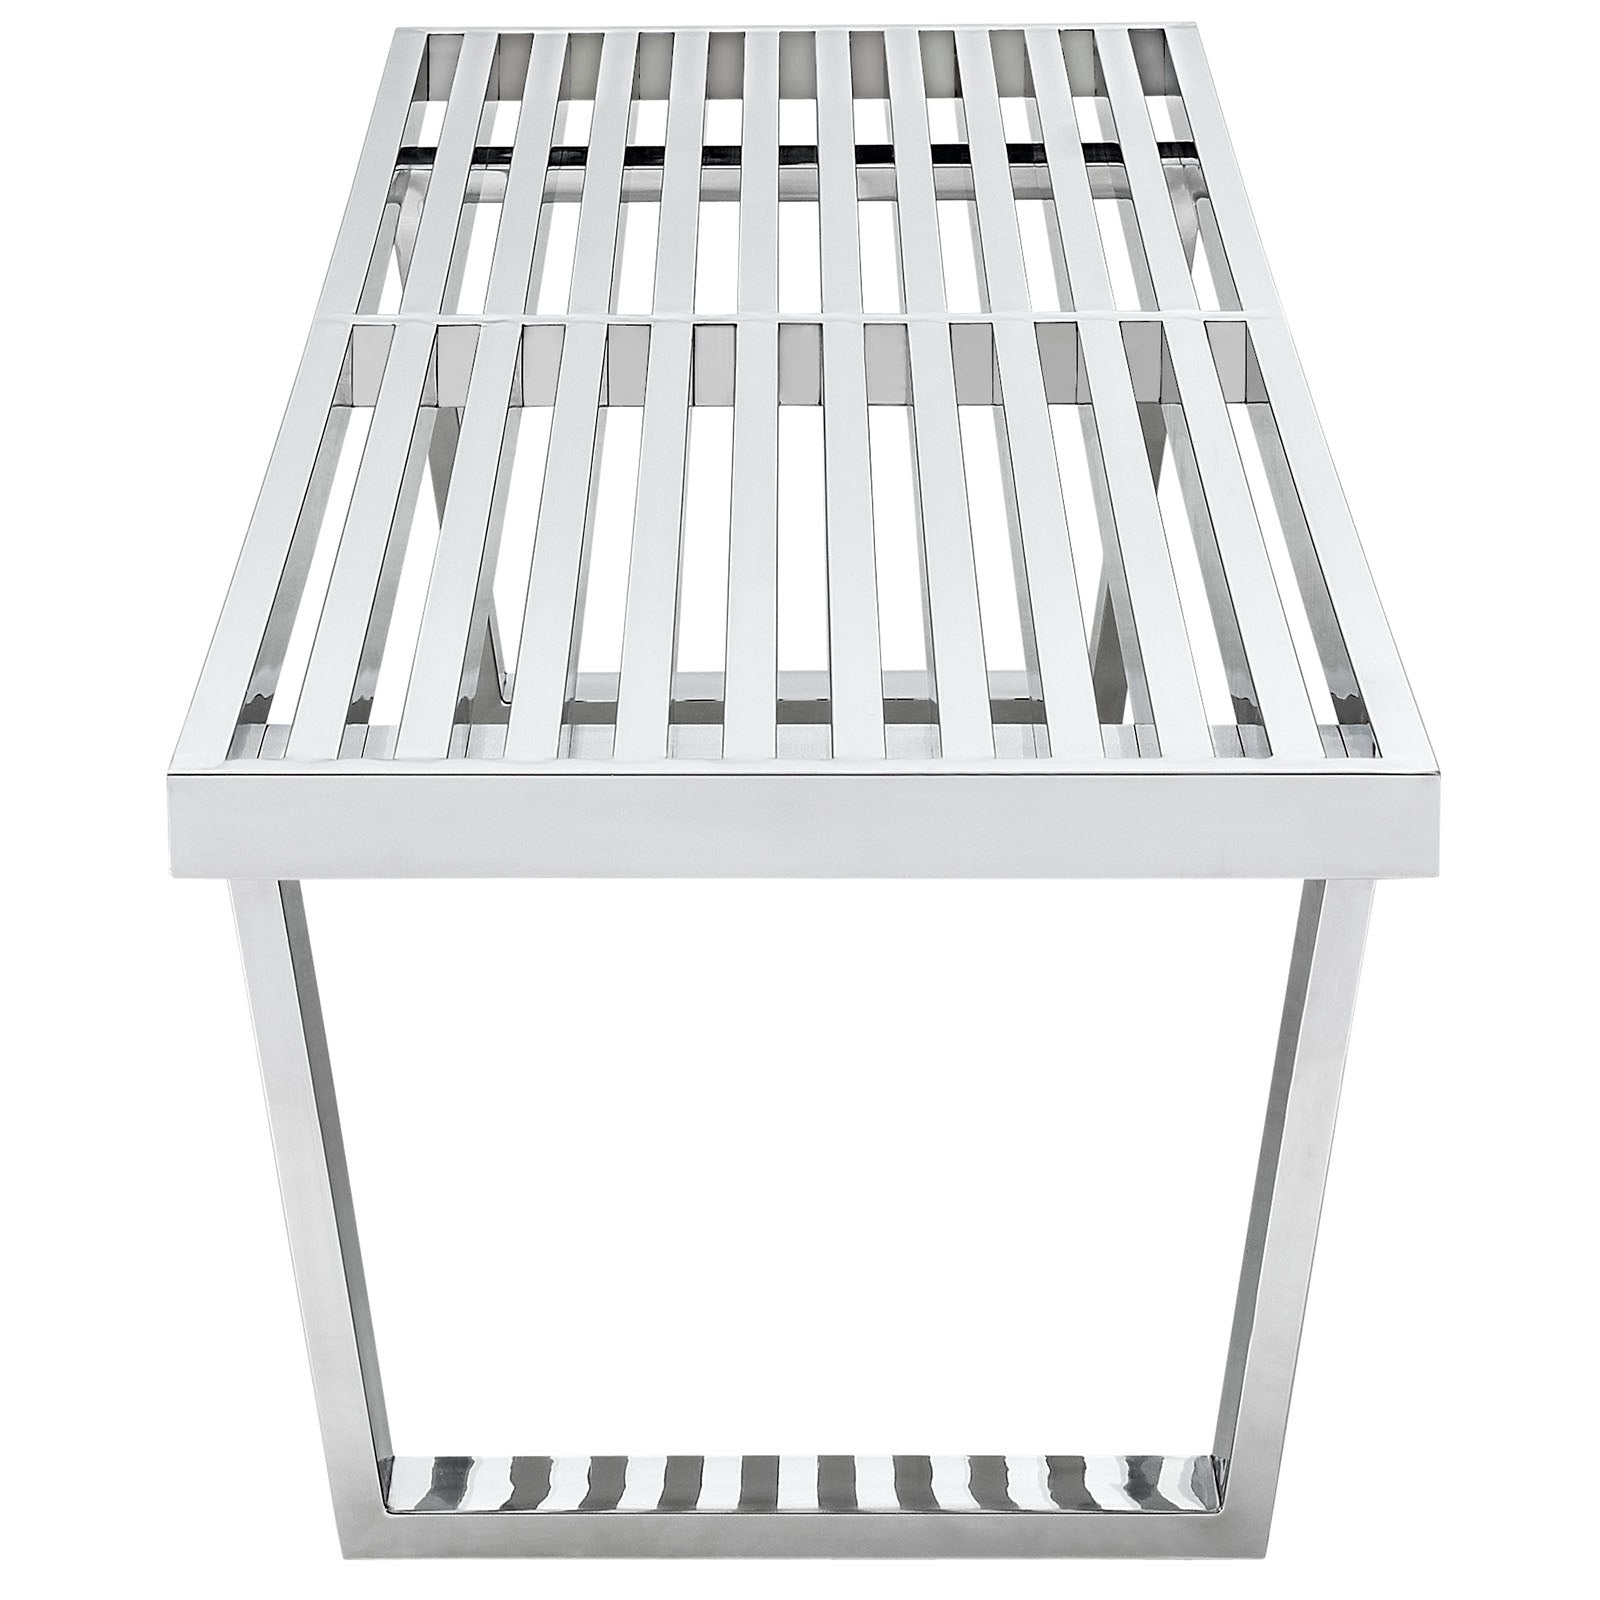 Sauna 5' Stainless Steel Bench - East Shore Modern Home Furnishings